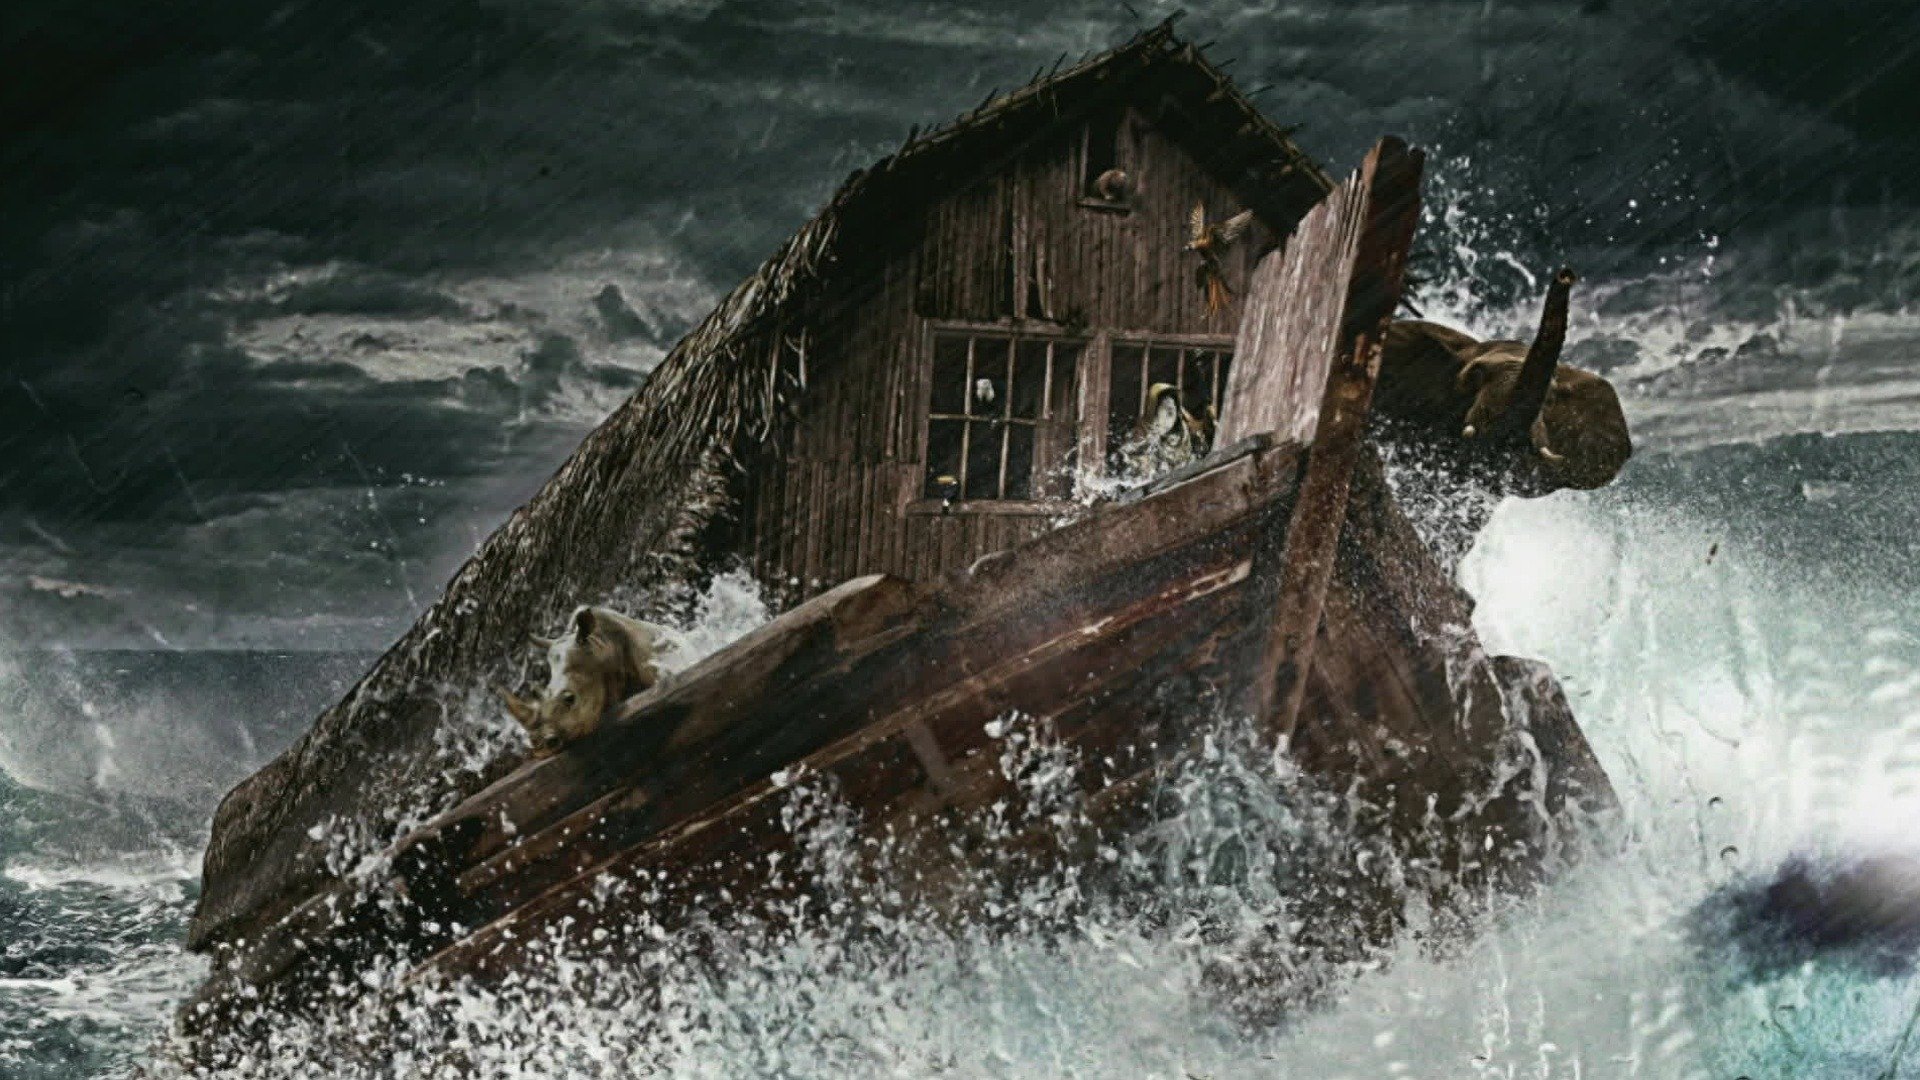 13. The Search for Noah's Ark